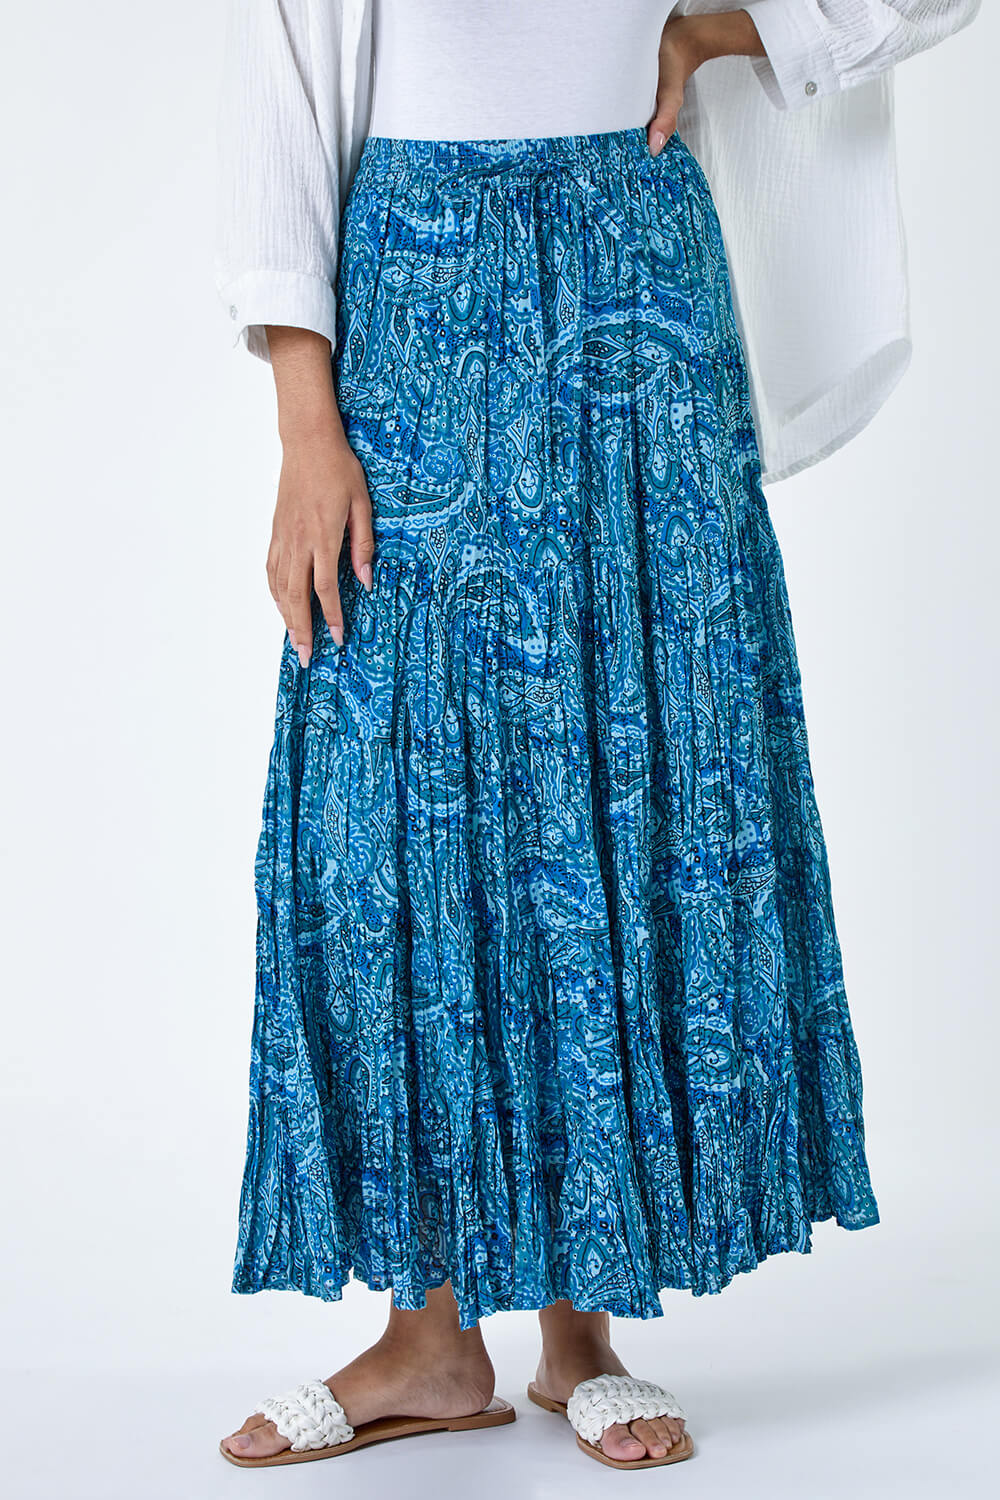 Blue Paisley Crinkle Cotton Tiered Maxi Skirt, Image 4 of 5